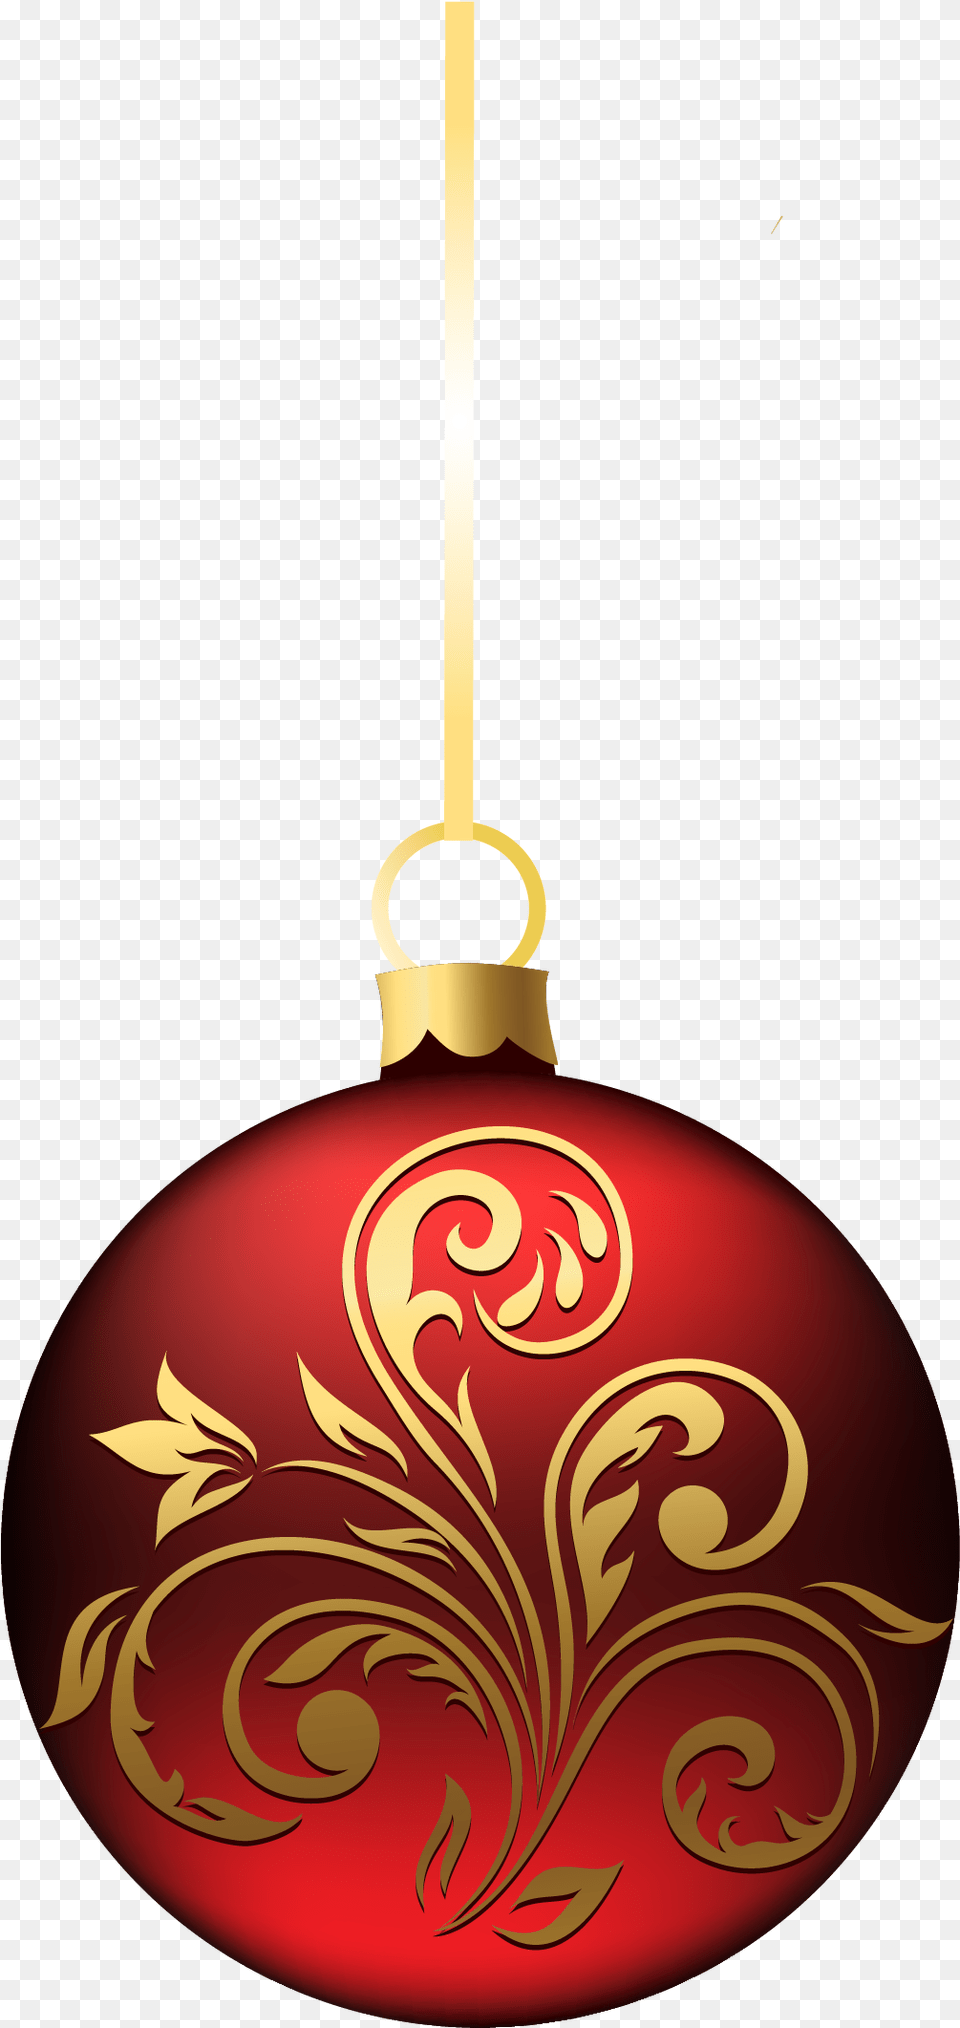 Gallery Recent Updates Christmas Tree Ornaments, Accessories, Lamp Png Image